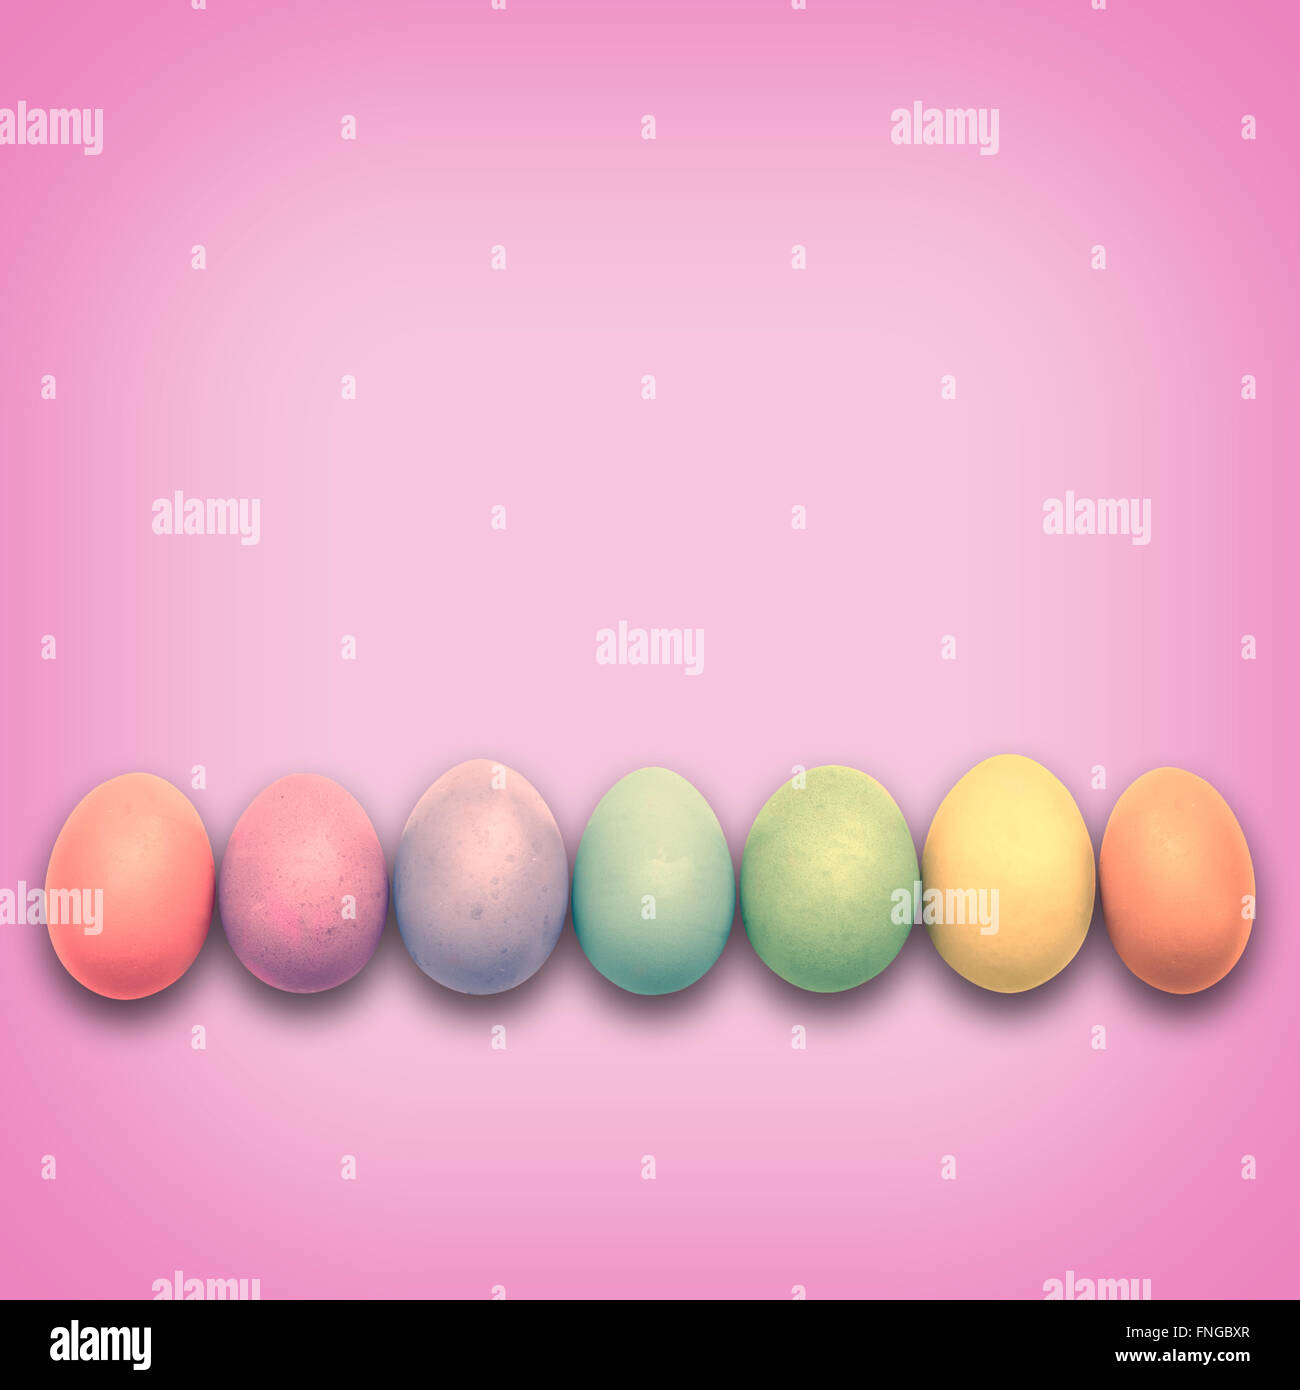 Pastel Easter eggs aligned, pink background Stock Photo